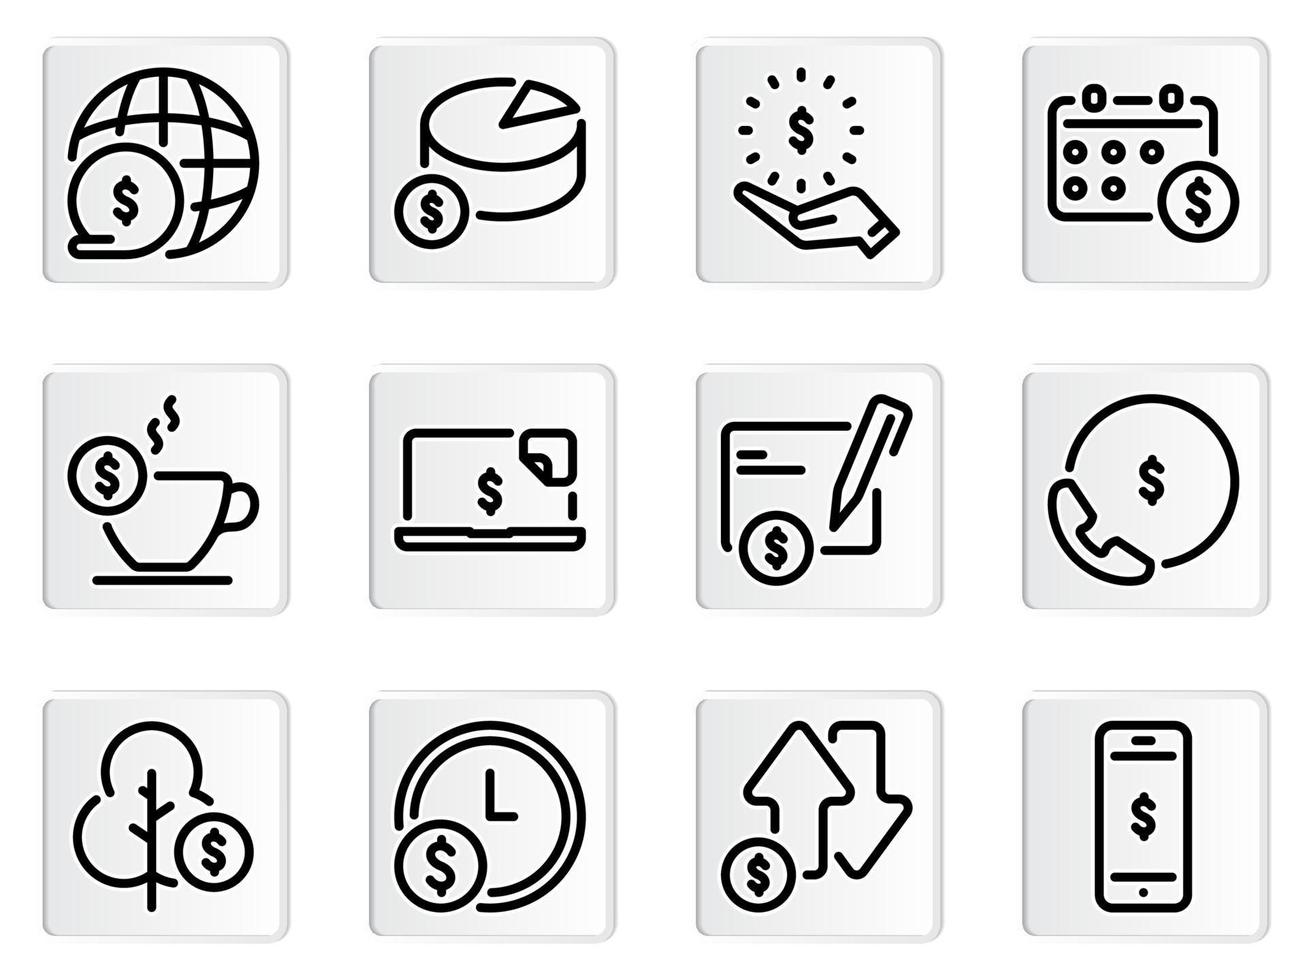 Simple vector icons. Flat illustration on a theme money, credit and deposit